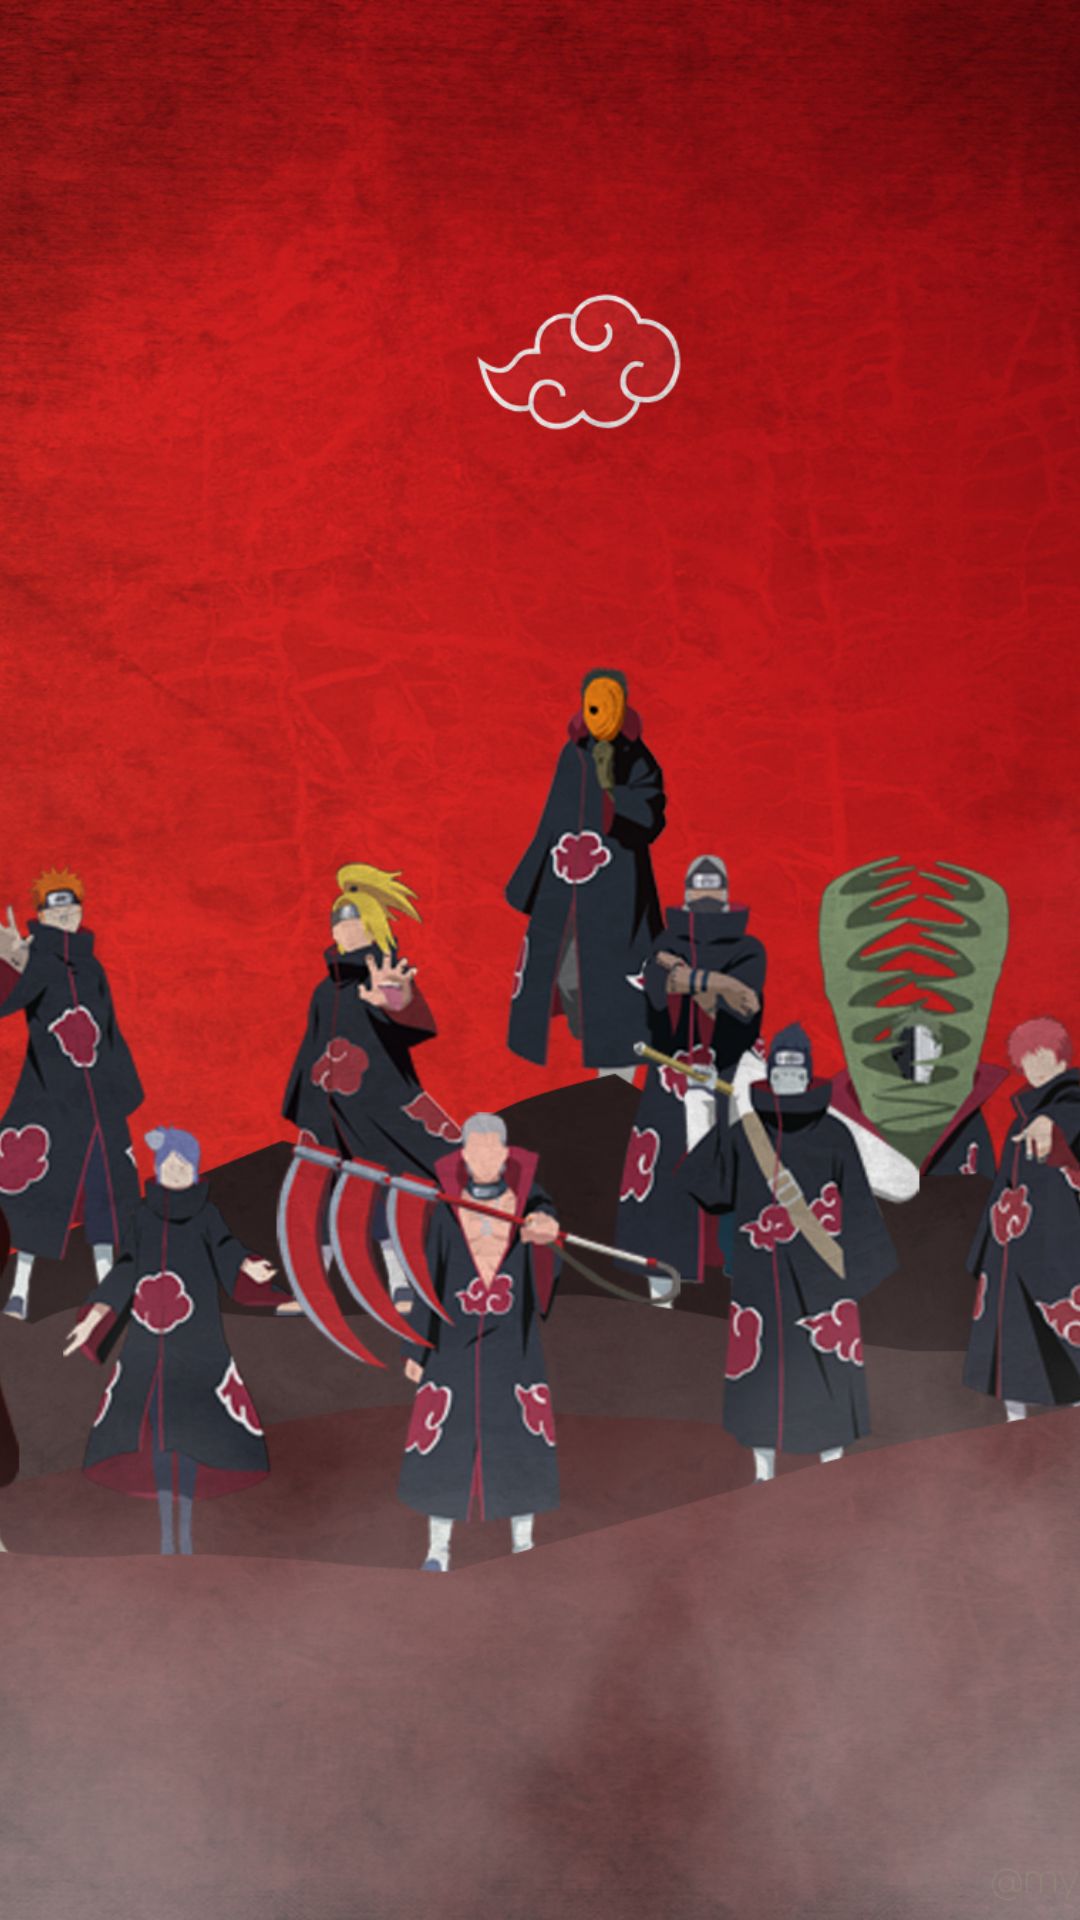 Akatsuki Wallpaper for mobile phone tablet desktop computer and other  devices HD and 4K wallpapers  Anime Anime wallpaper Naruto wallpaper